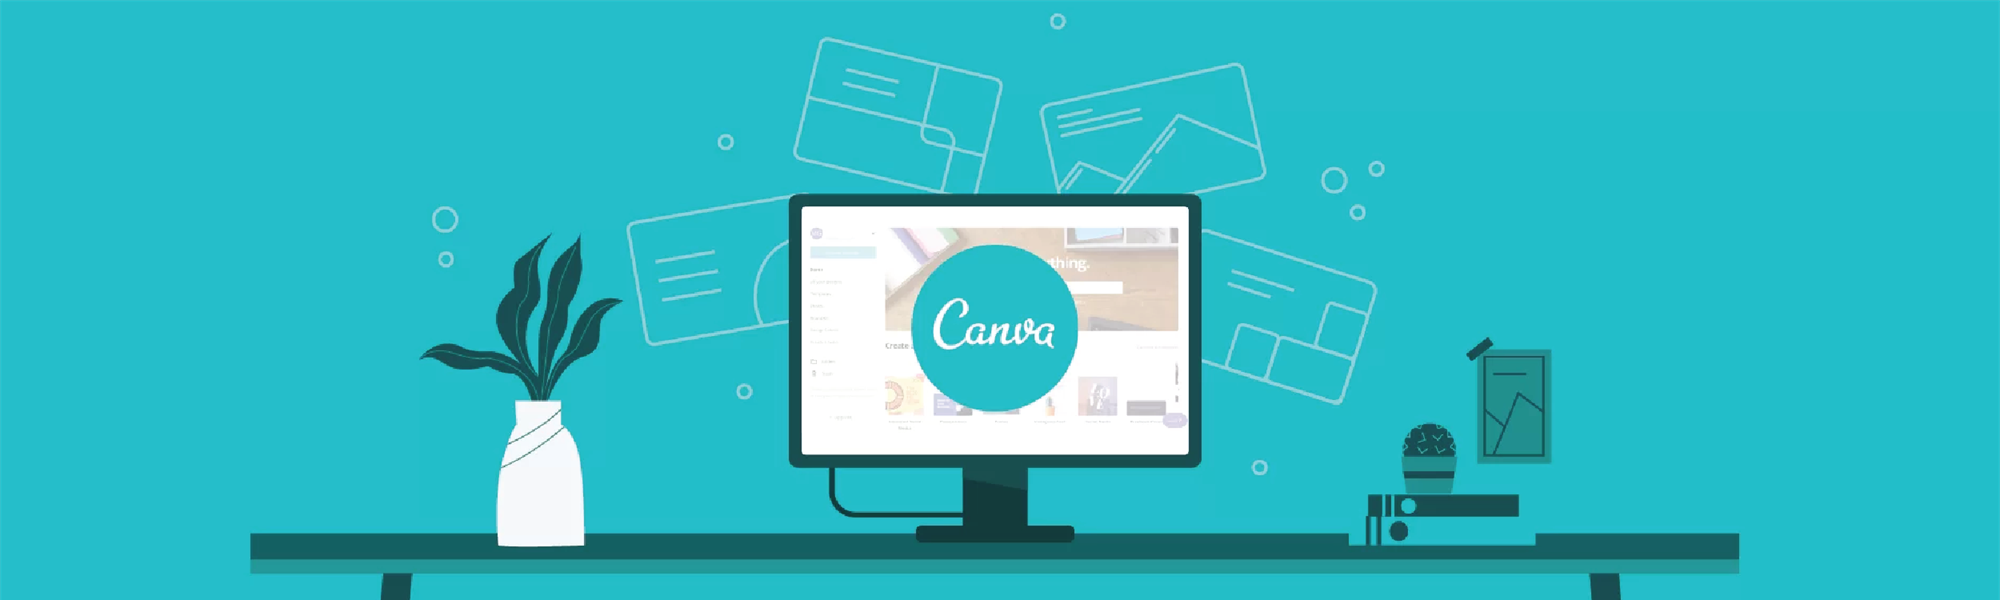 Create with Canva • Create, Post, Engage! Getting the Most out of Social Media